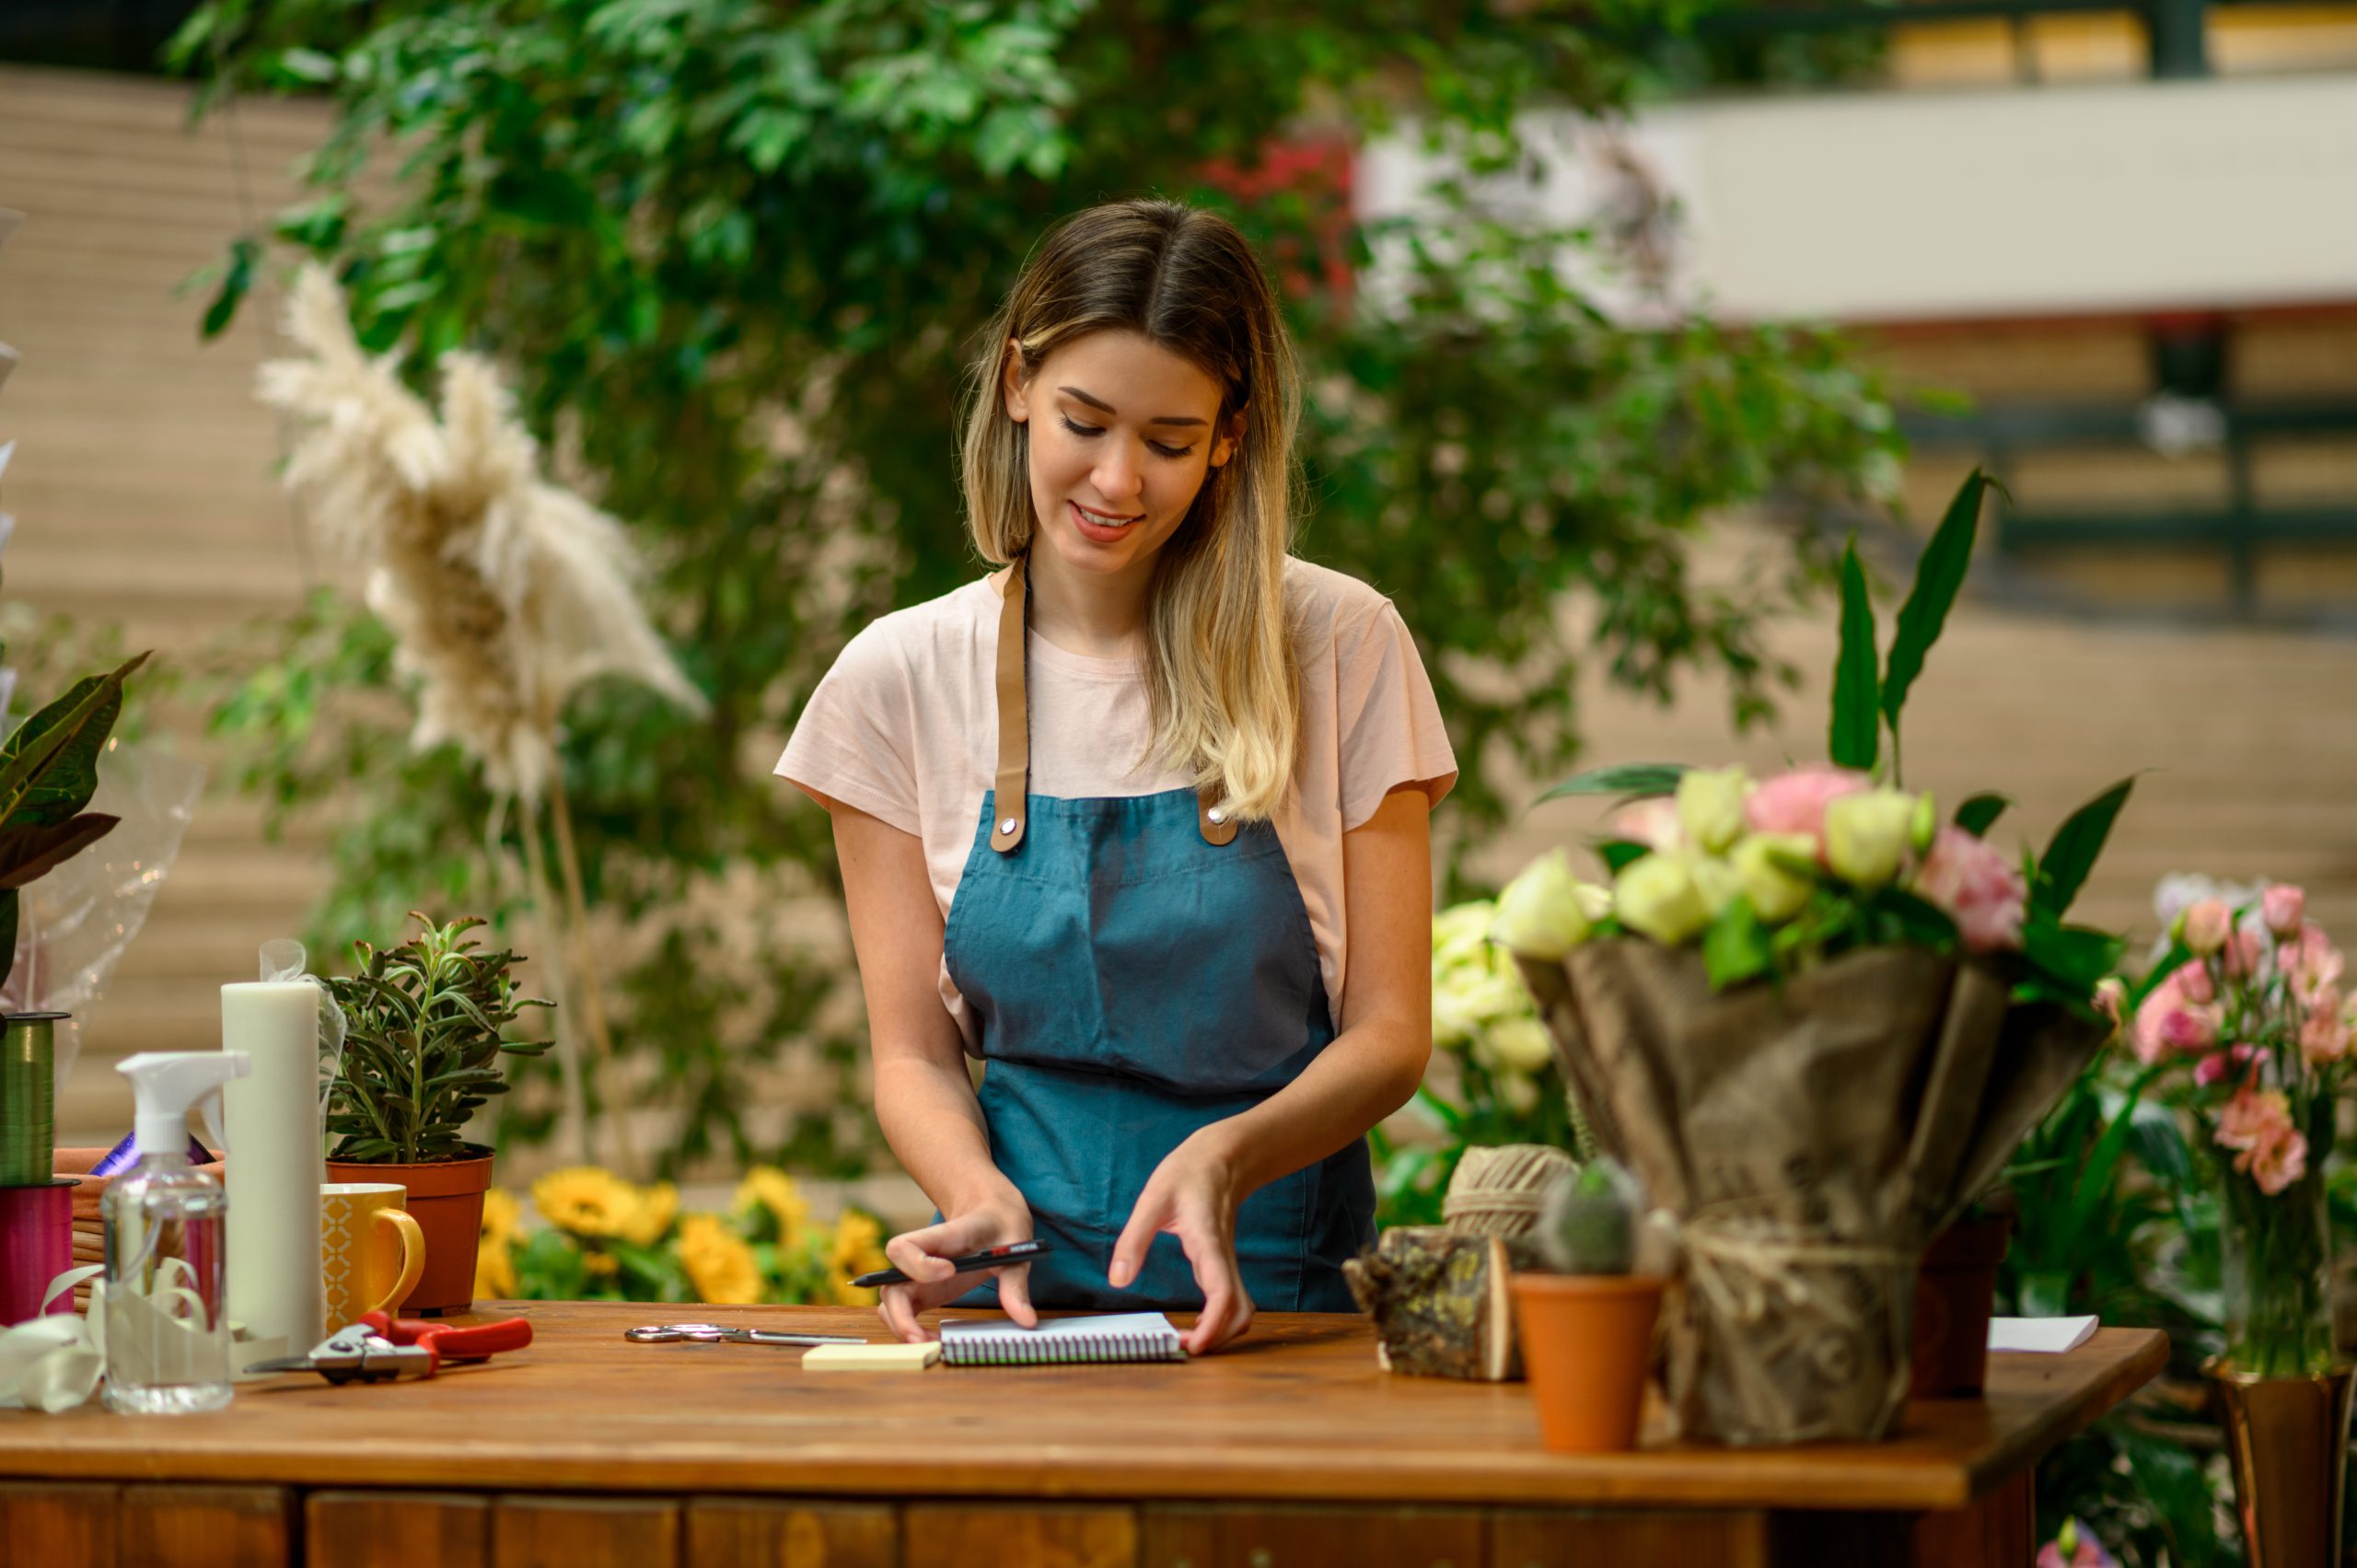 Portrait of florist writing in notebook while leaning against counter while surrounded with flowers and plants in a flower shop